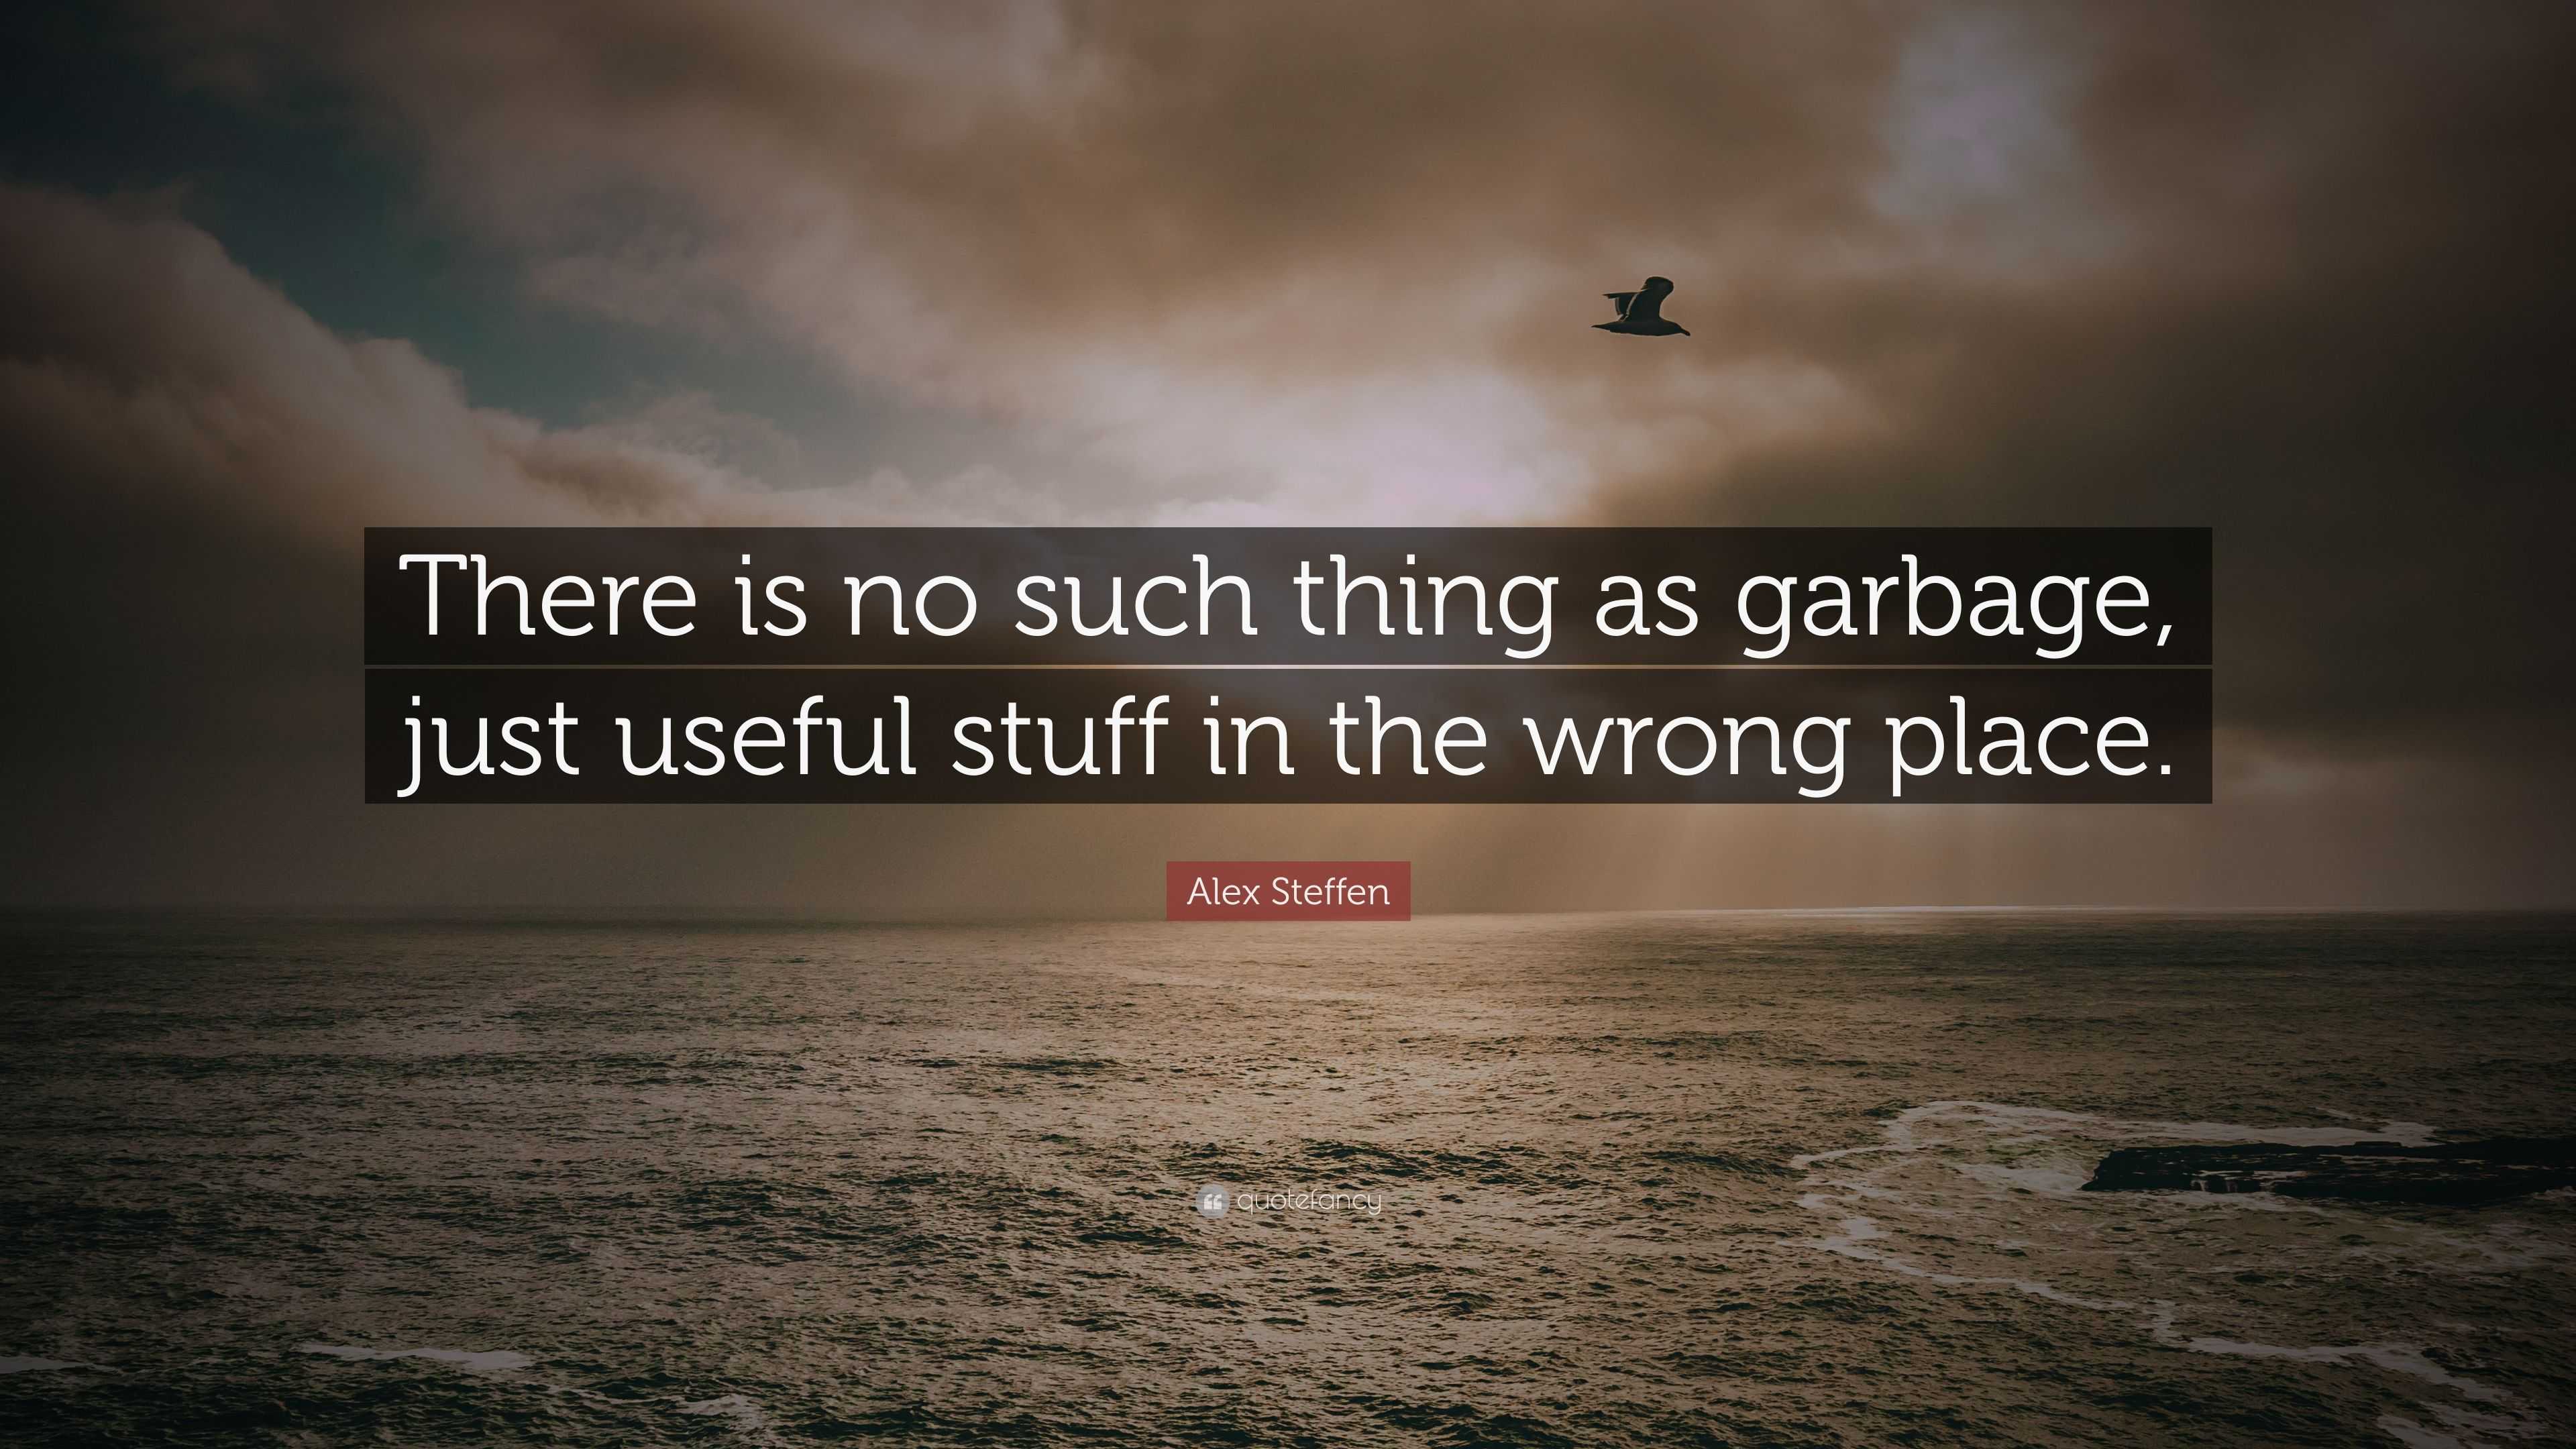 Alex Steffen Quote: “There is no such thing as garbage, just